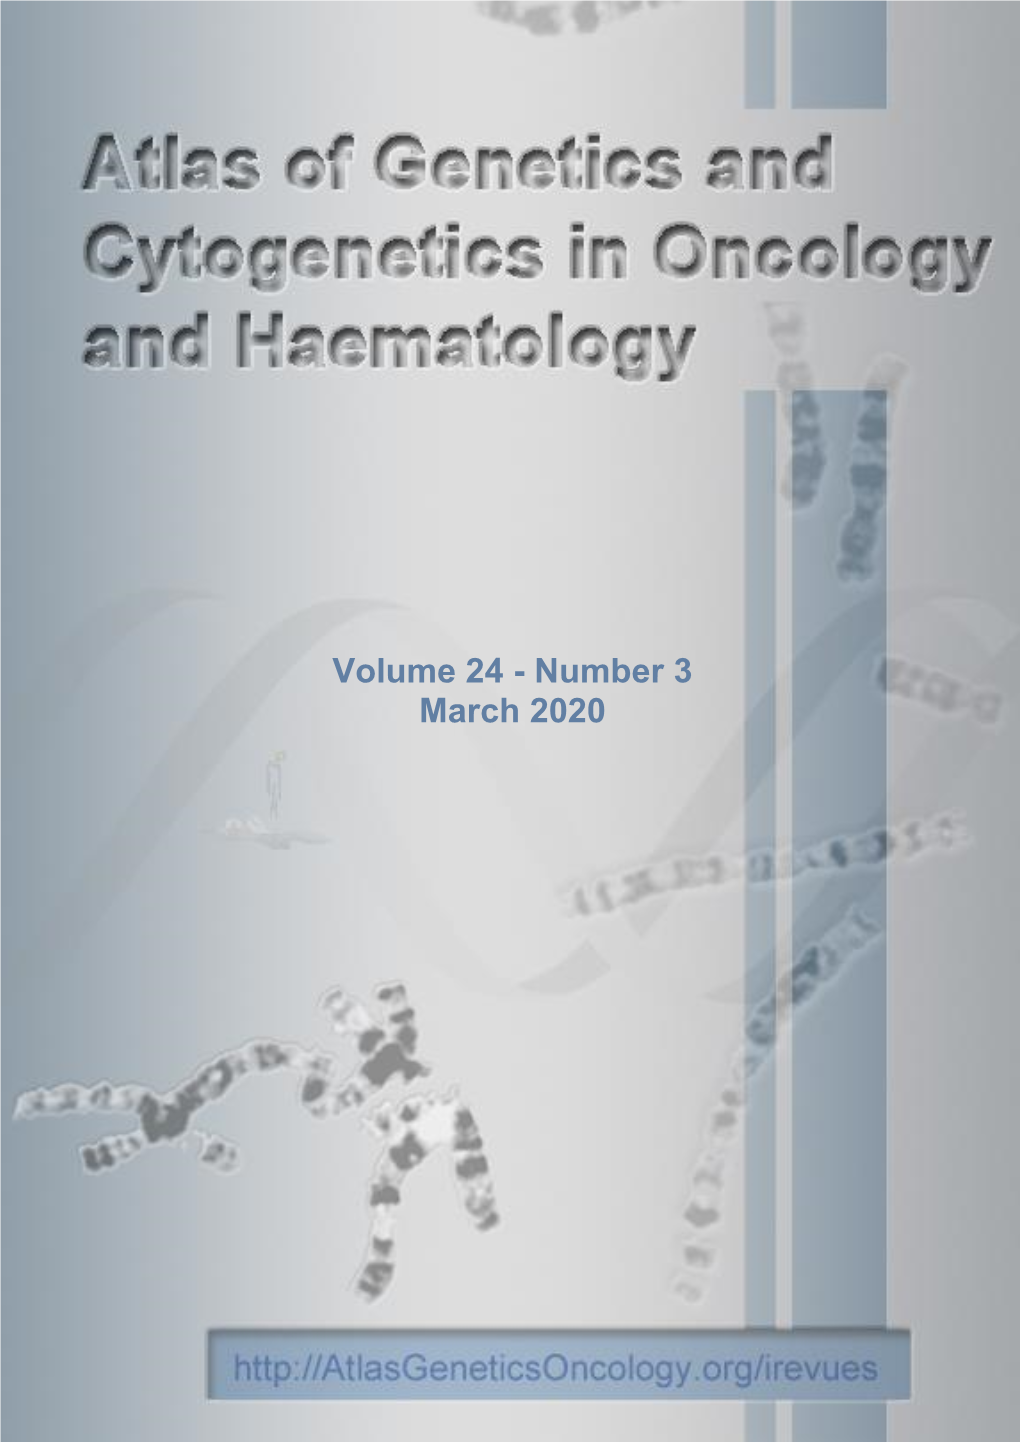 Number 3 March 2020 Atlas of Genetics and Cytogenetics in Oncology and Haematology